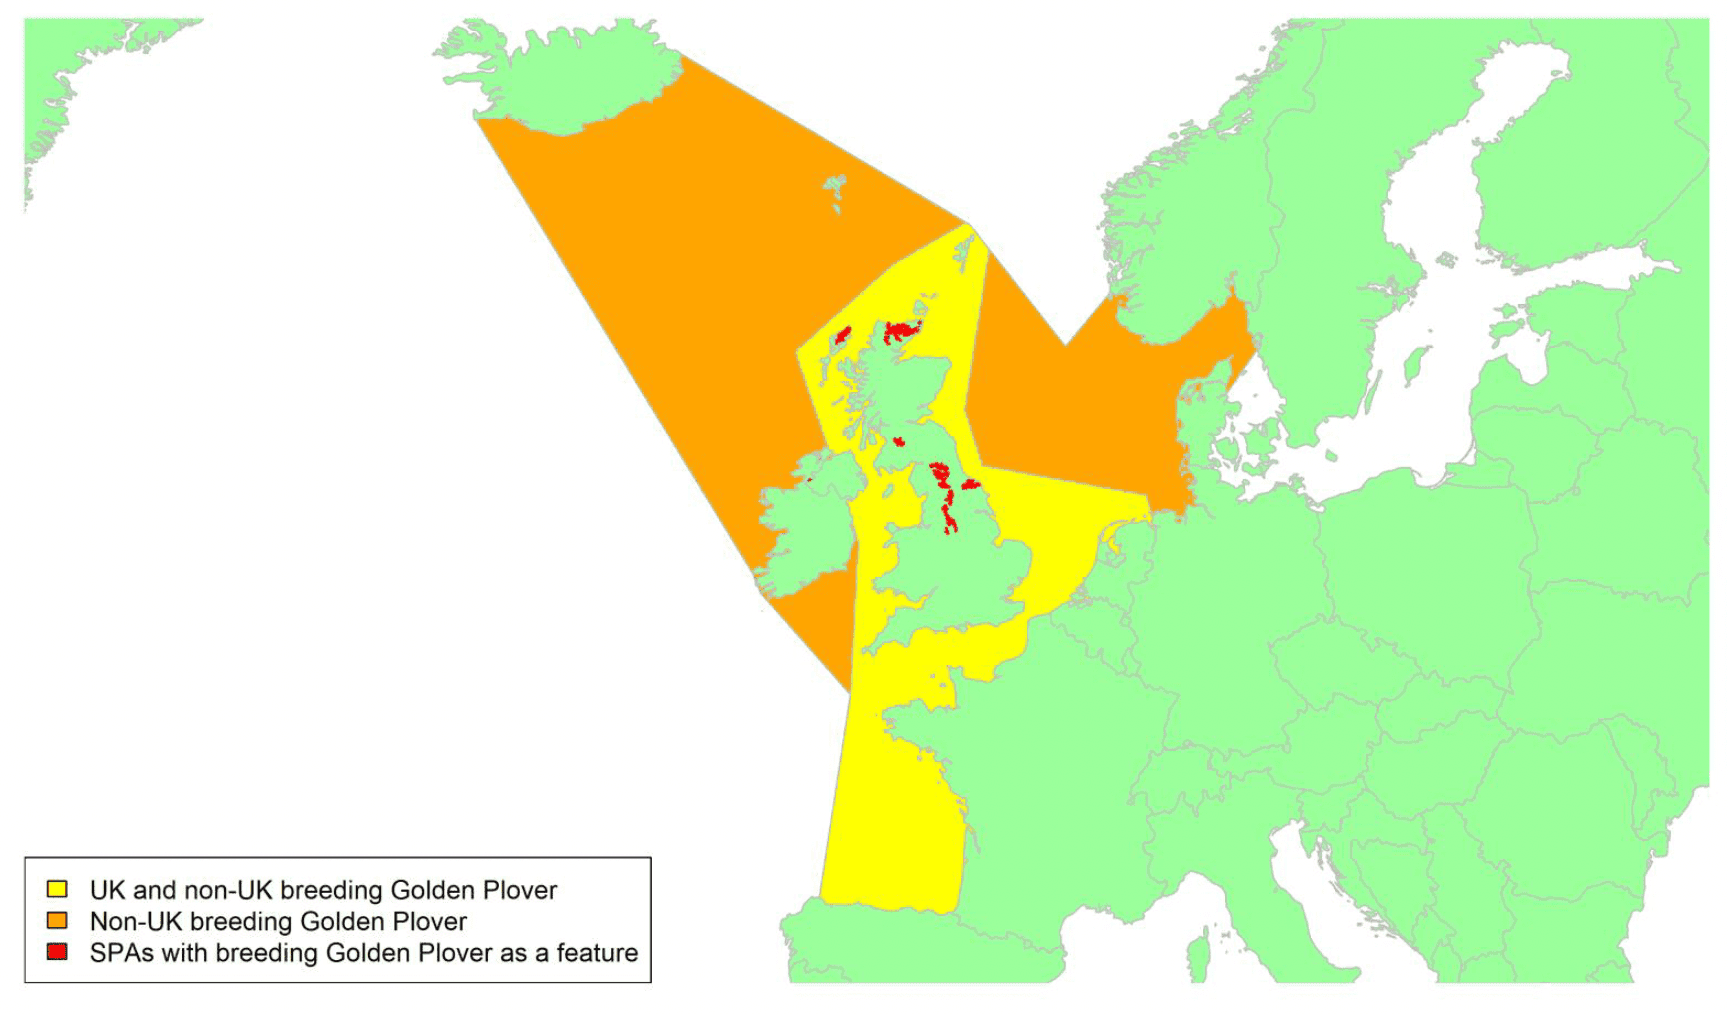 Map of North West Europe showing migratory routes and SPAs within the UK for breeding Golden Plover as described in the text below.